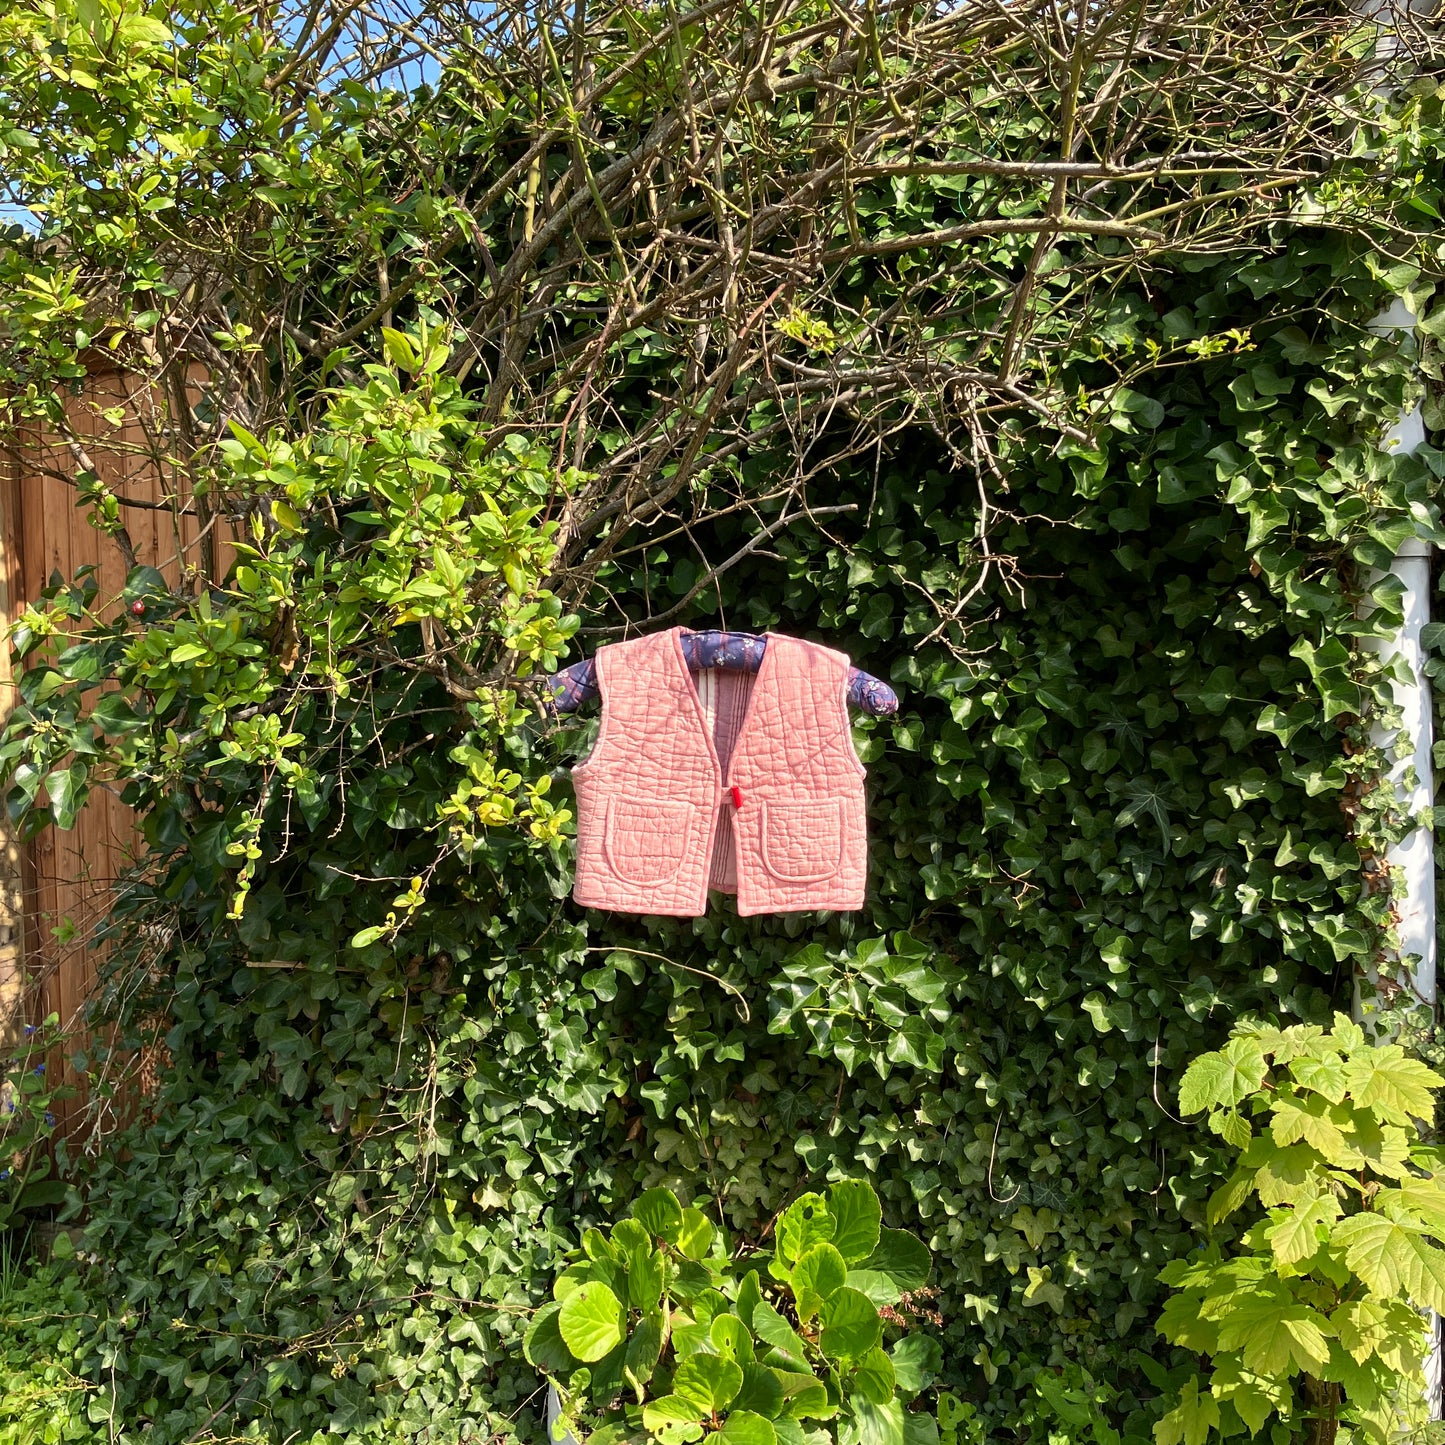 kids vest/gilet/waistcoat made from offcuts of a reclaimed pink quilt. Shown hanging on a blue vintage hanger in some foliage 